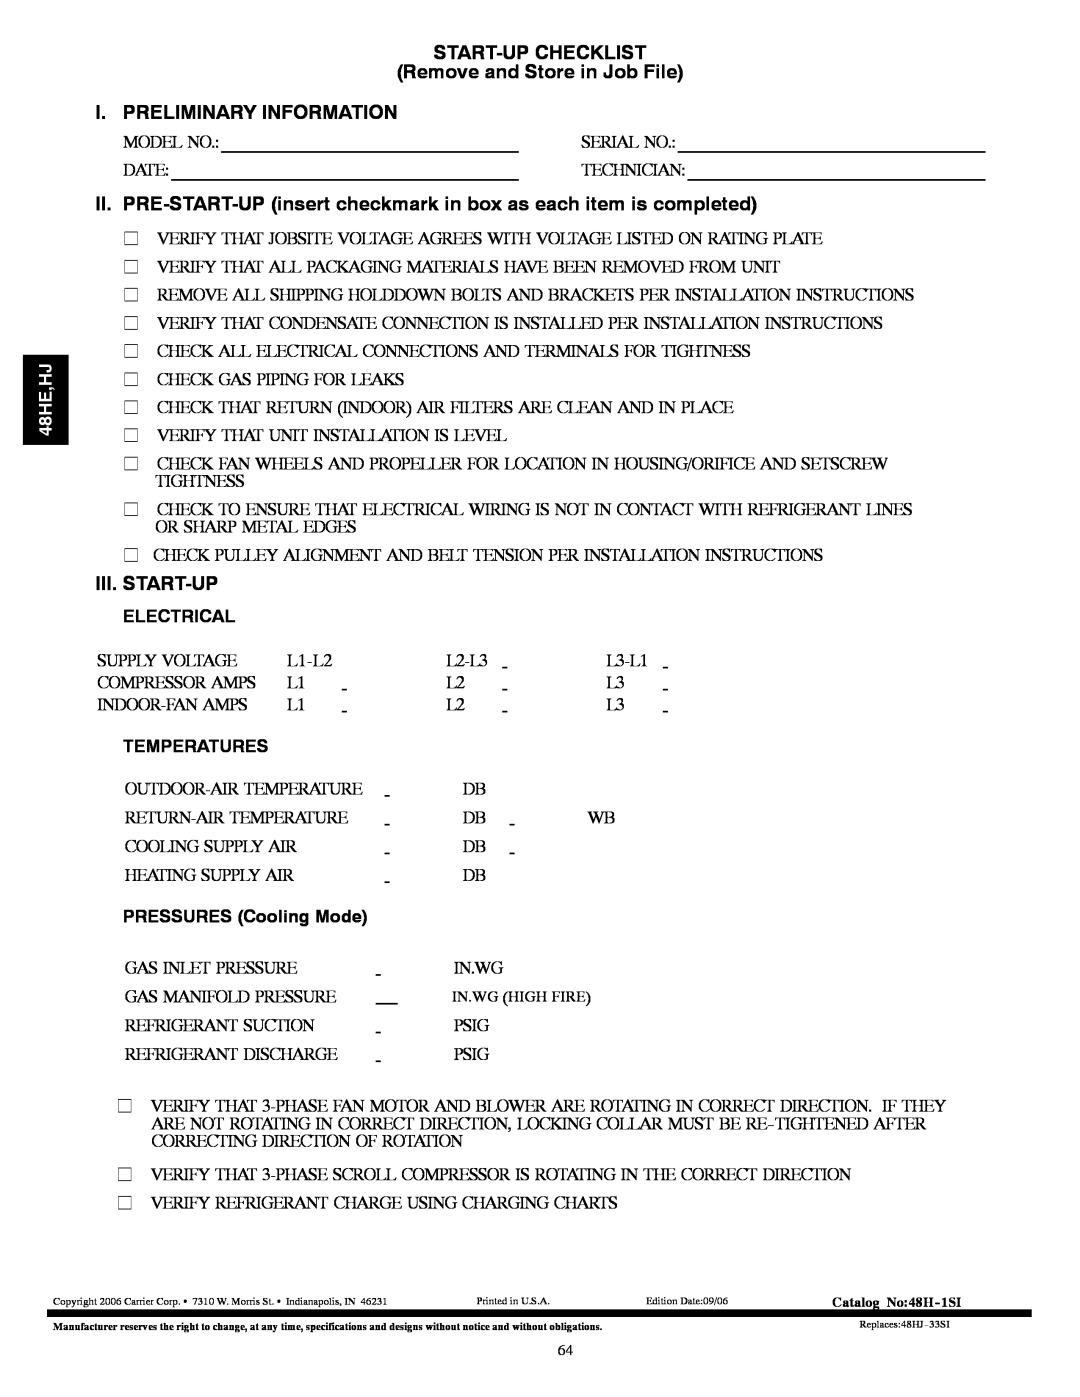 Carrier 48HE003---006 START-UPCHECKLIST Remove and Store in Job File, I. Preliminary Information, Iii.Start-Up, 48HE,HJ 